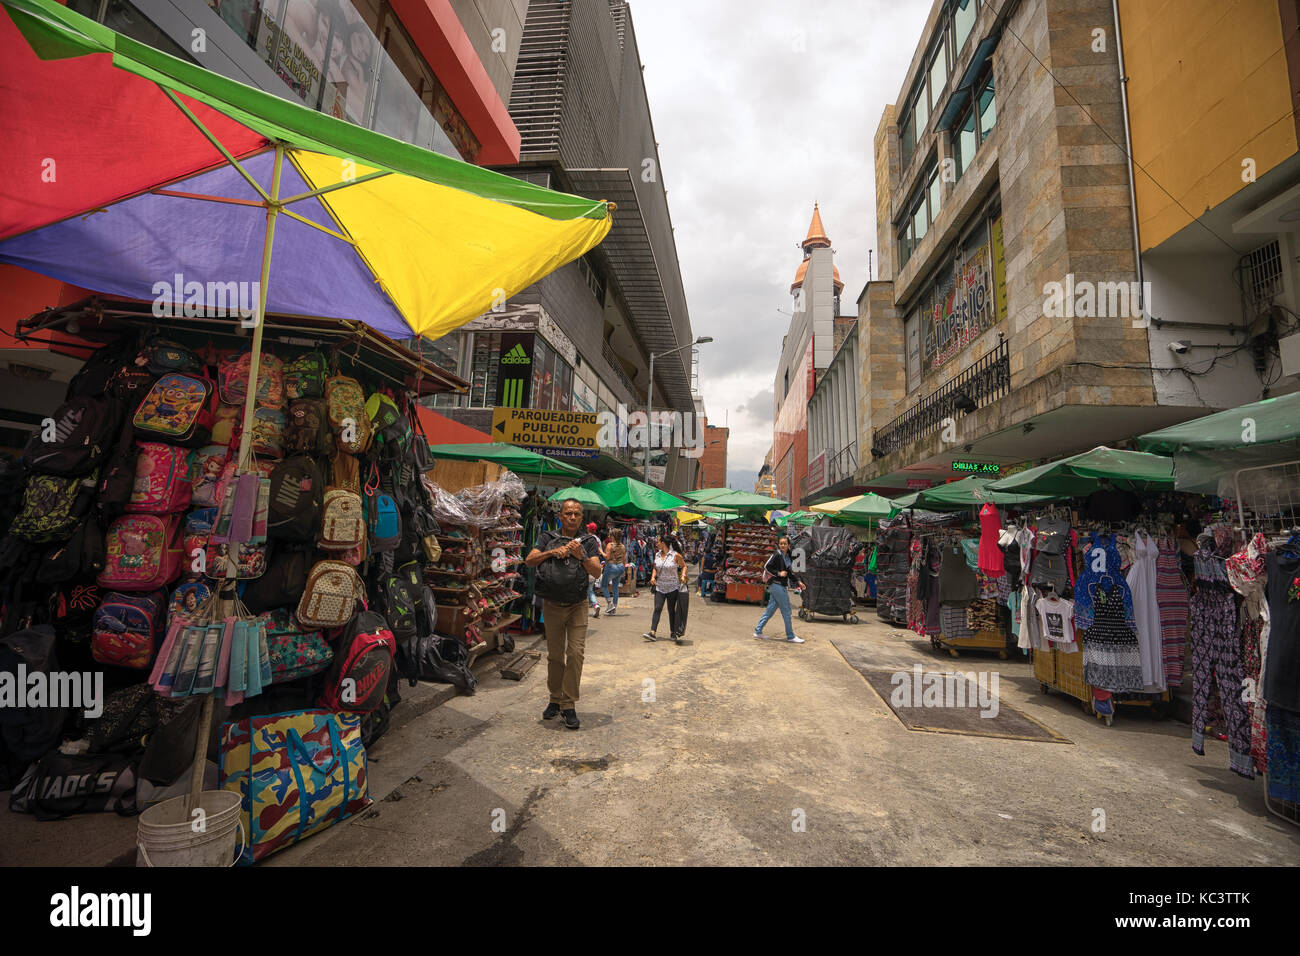 September 26, 2017 Medellin, Colombia:  street vendors fill up the streets in the 'La Candelaria' area of the city Stock Photo